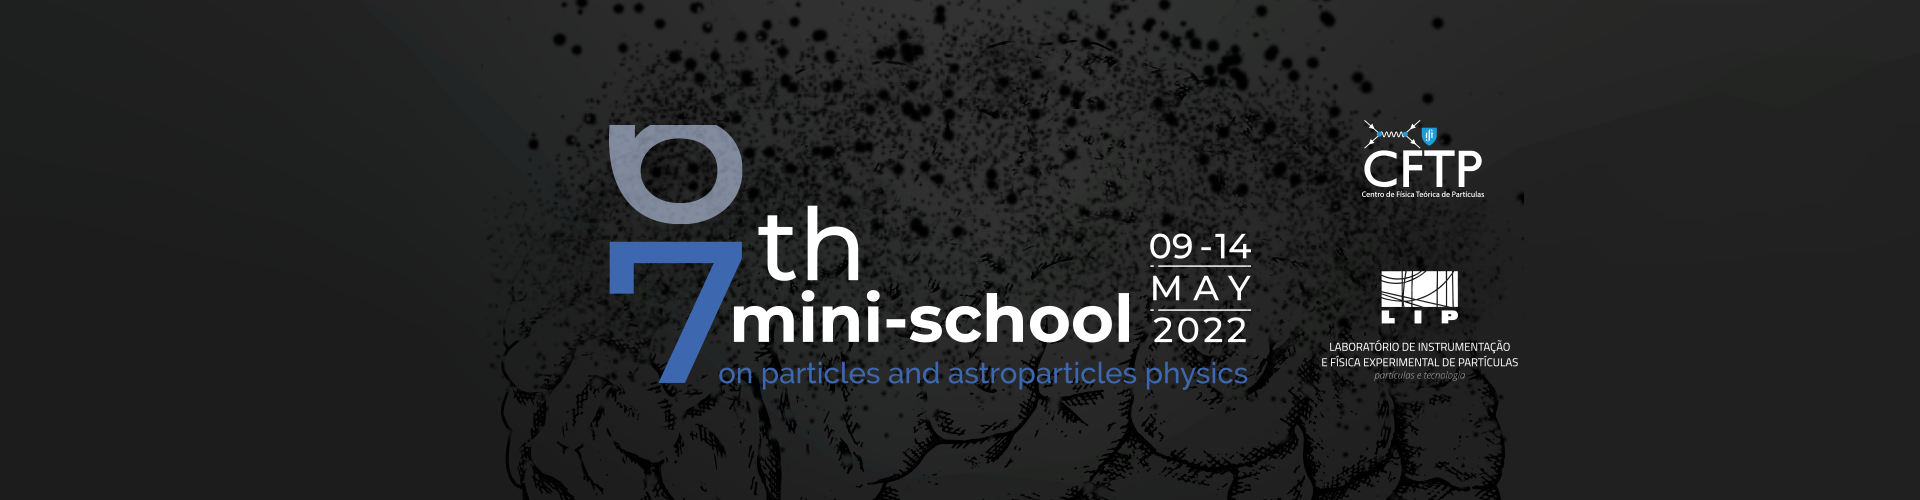 Seventh Lisbon mini-school on Particle and Astroparticle Physics